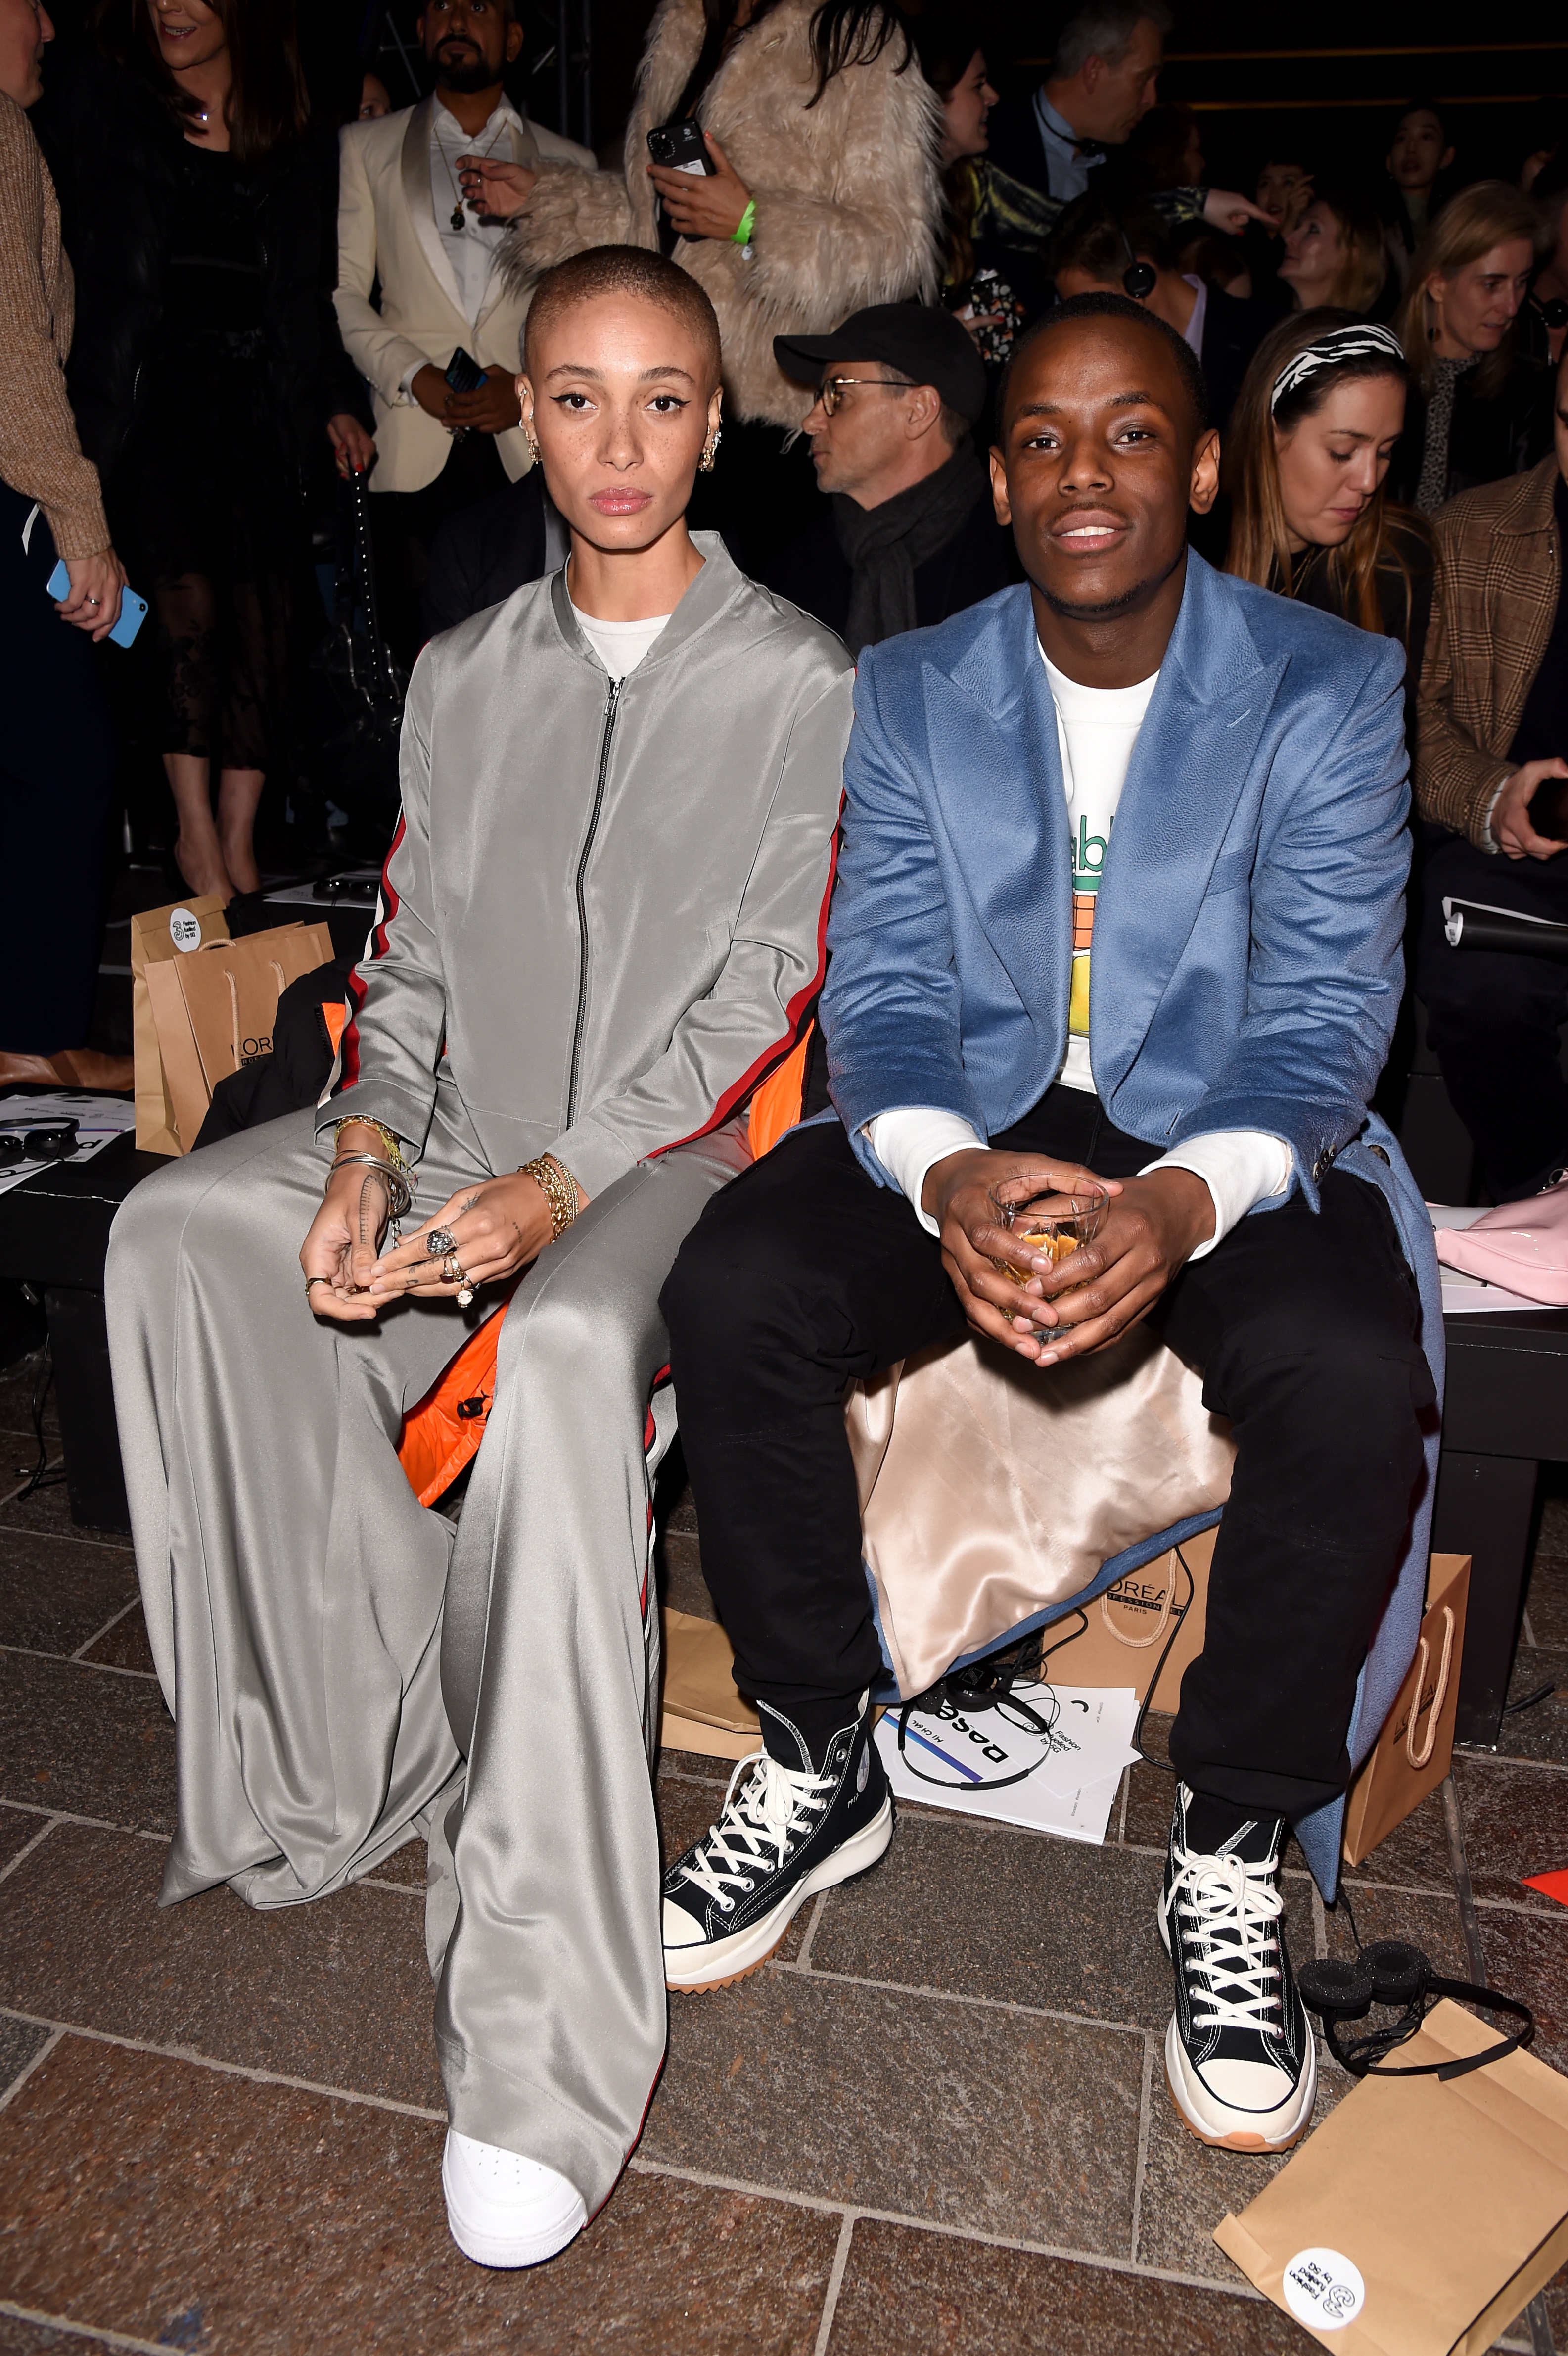 Adwoa Aboah and Micheal Ward attend the Central Saint Martins MA Fashion Show during London Fashion Week February 2020 at Central Saint Martins on February 14, 2020, in London, England. | Source: Getty Images